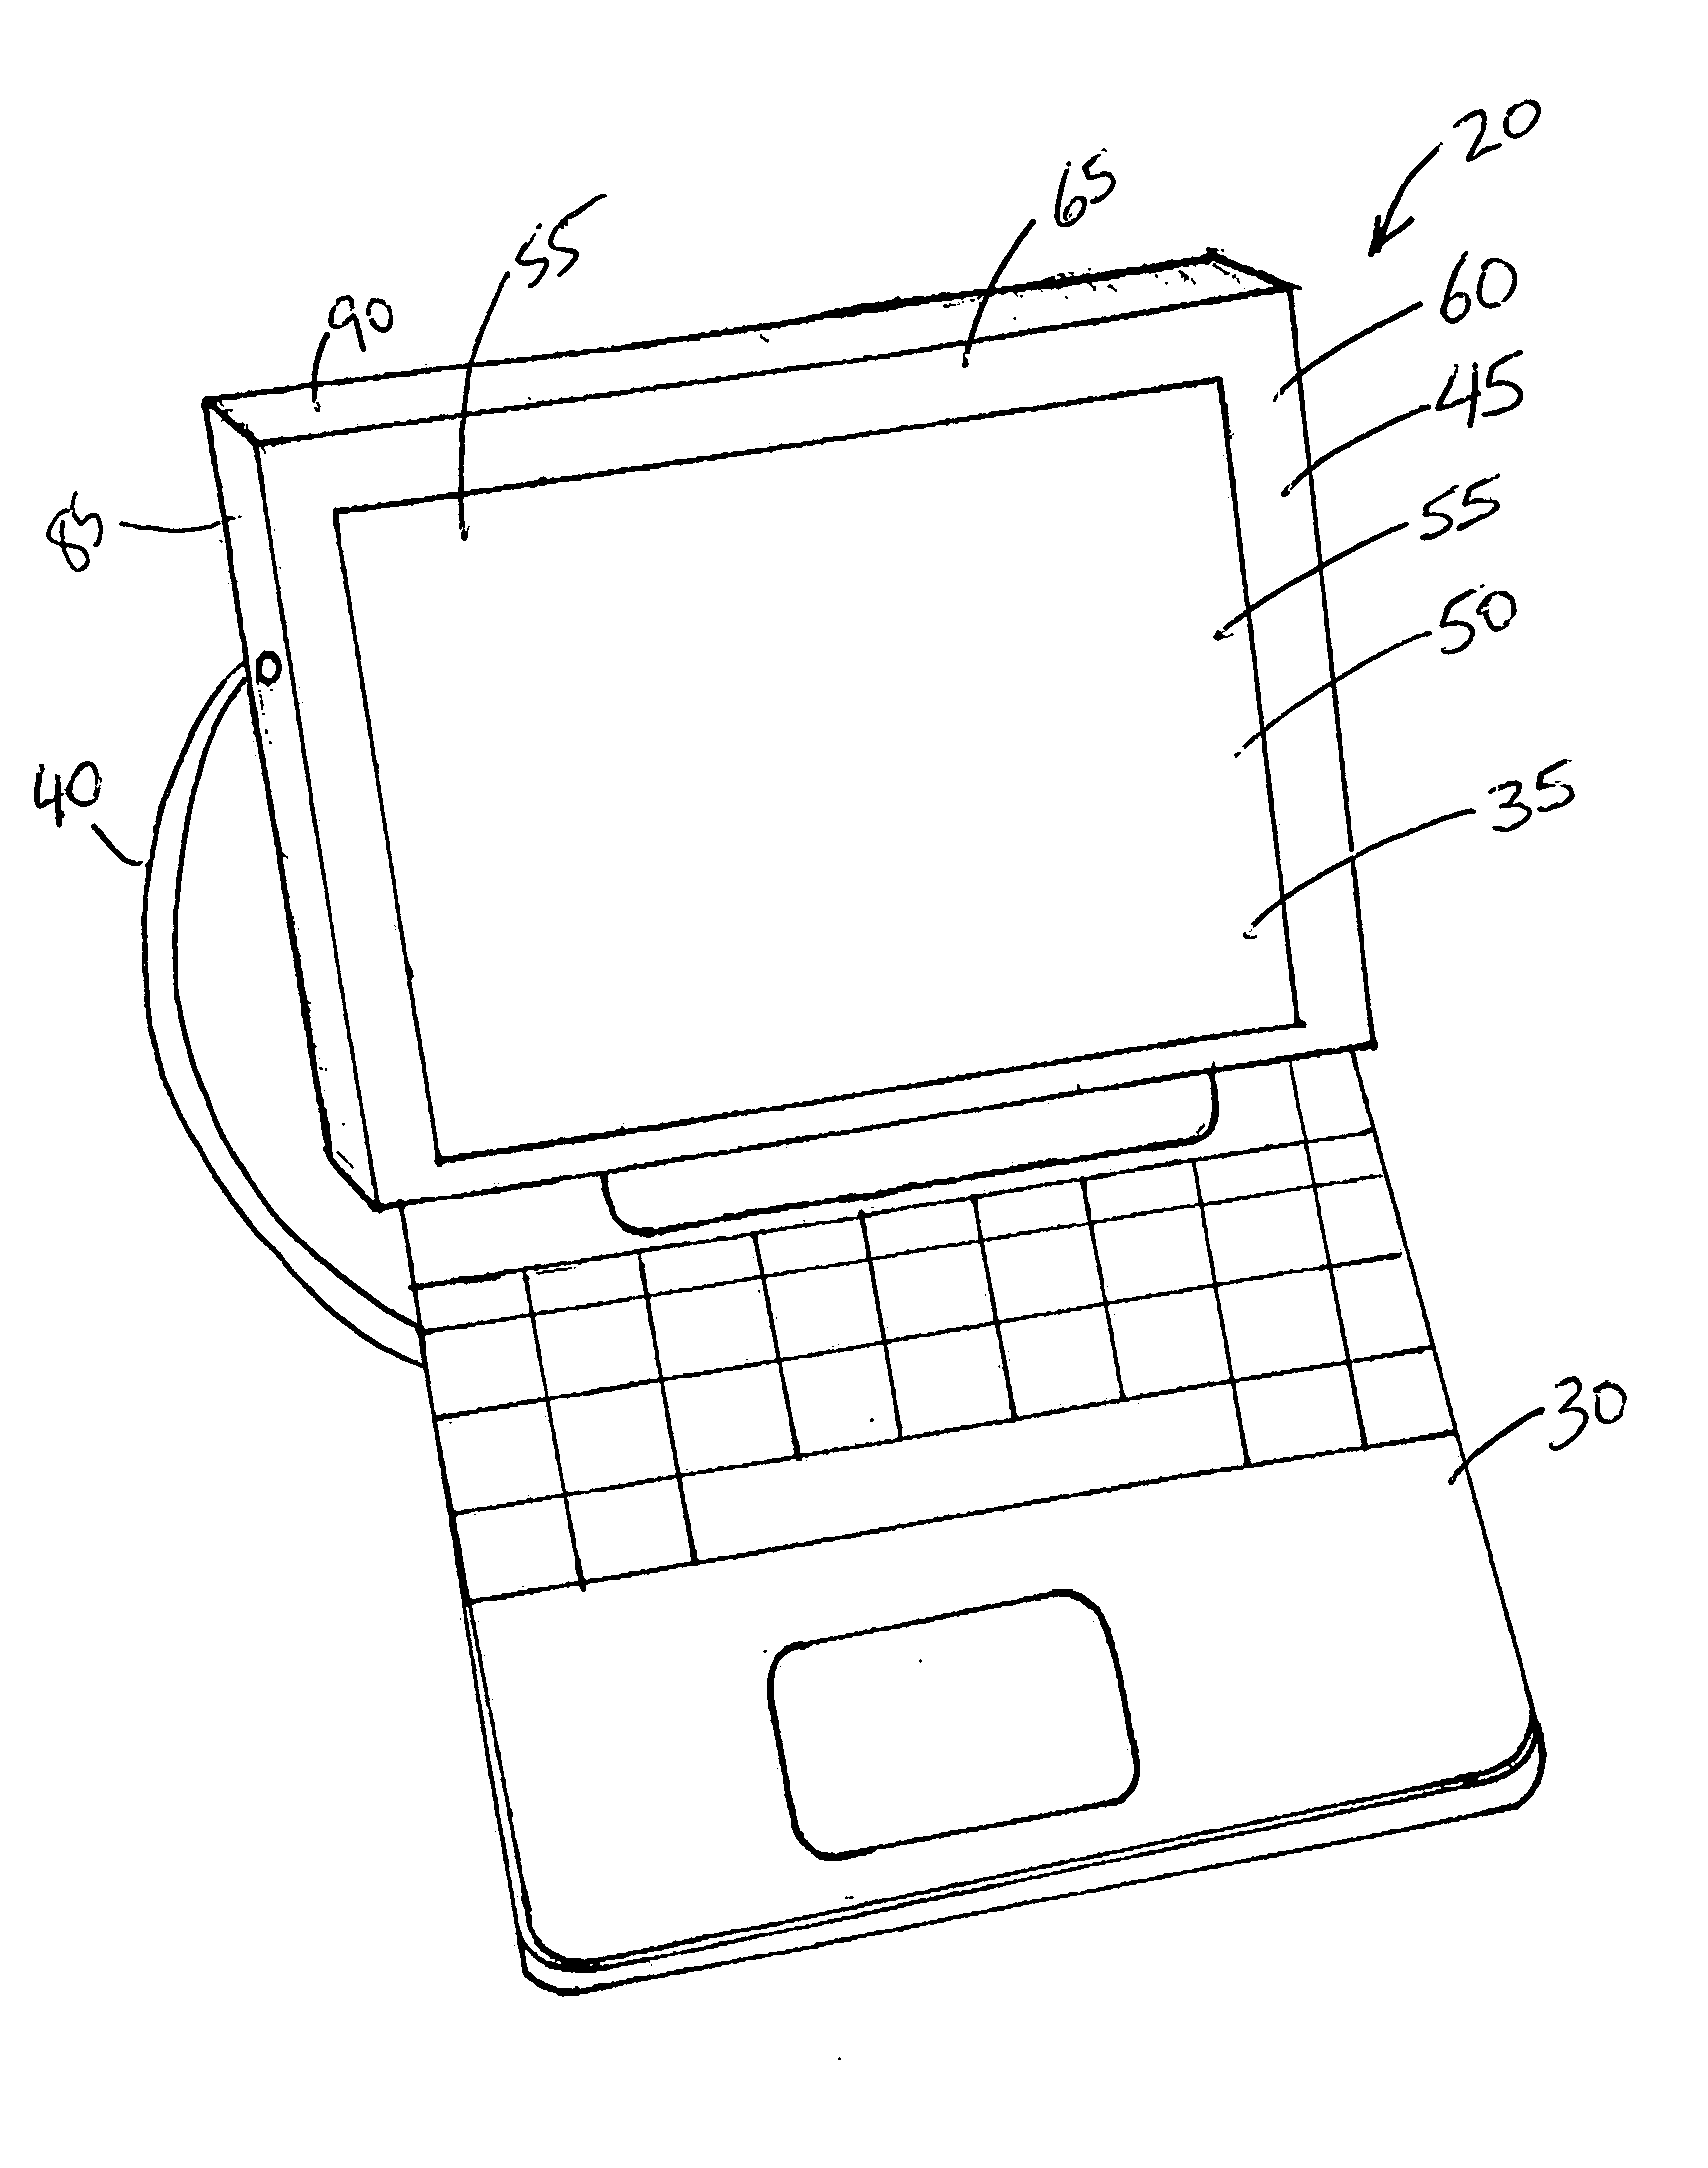 Slipcover touch input apparatus for displays of computing devices